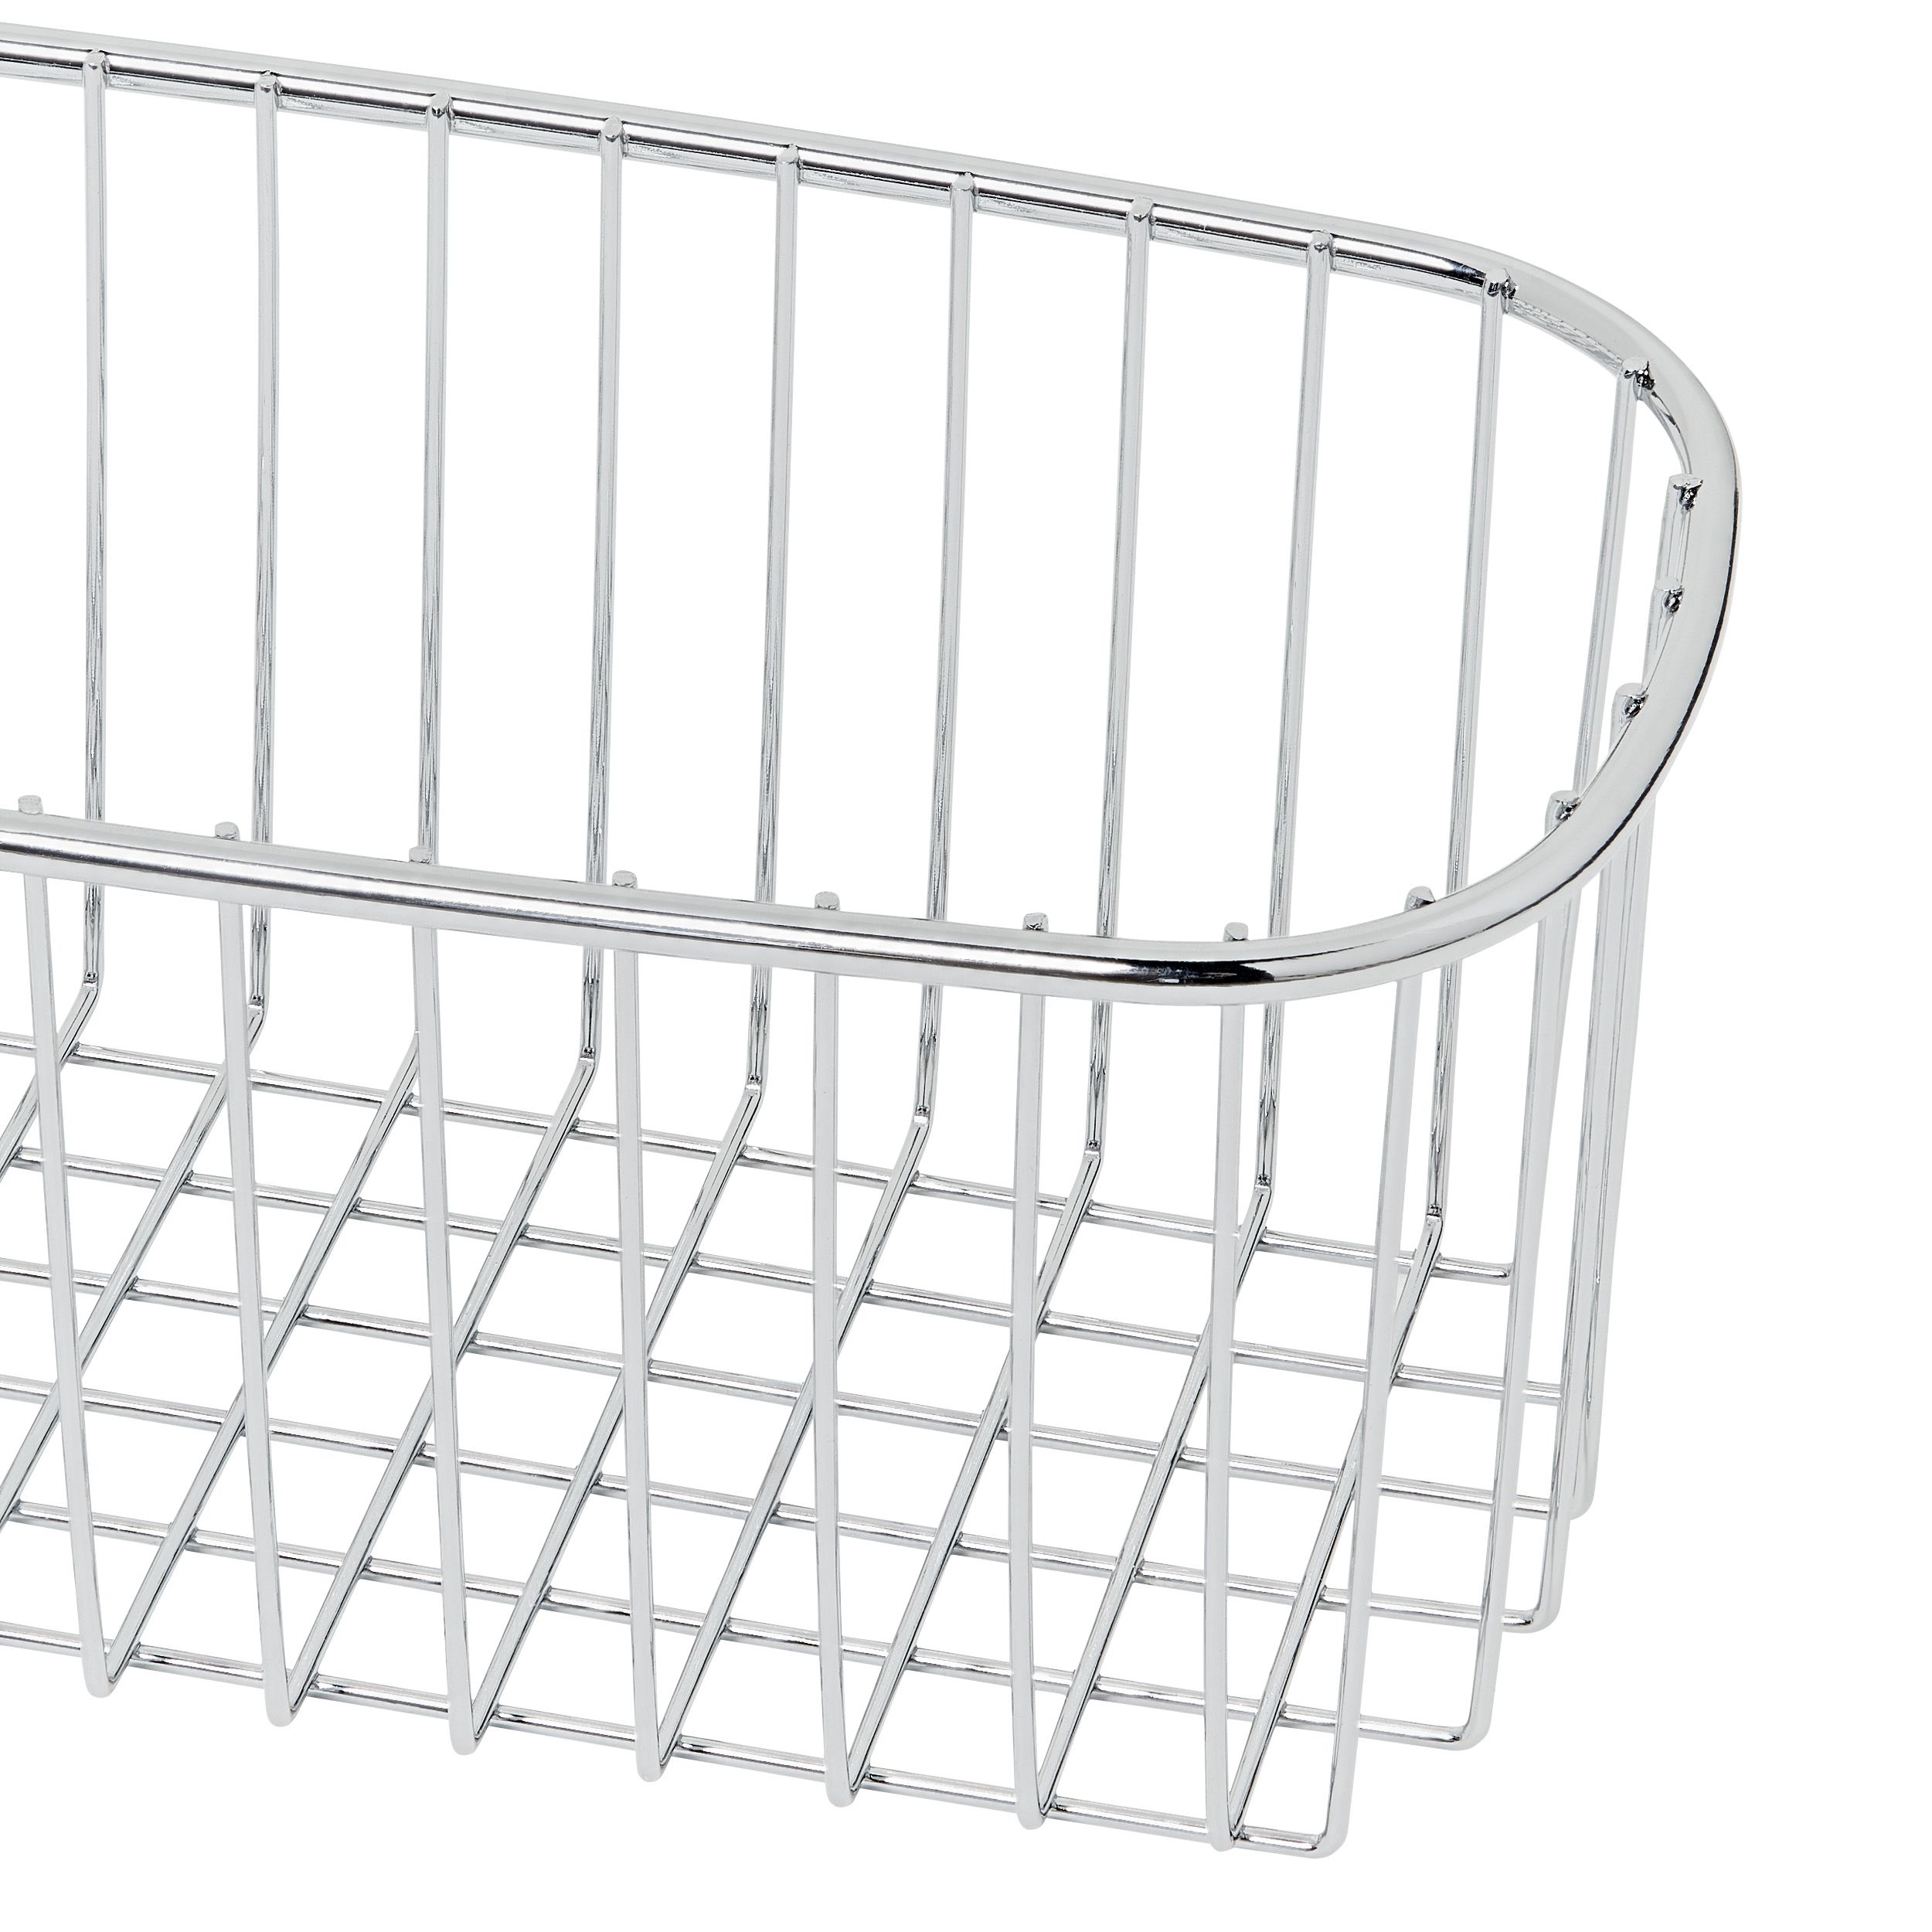 GoodHome Datil Steel Chrome effect Wire basket, (W)270mm